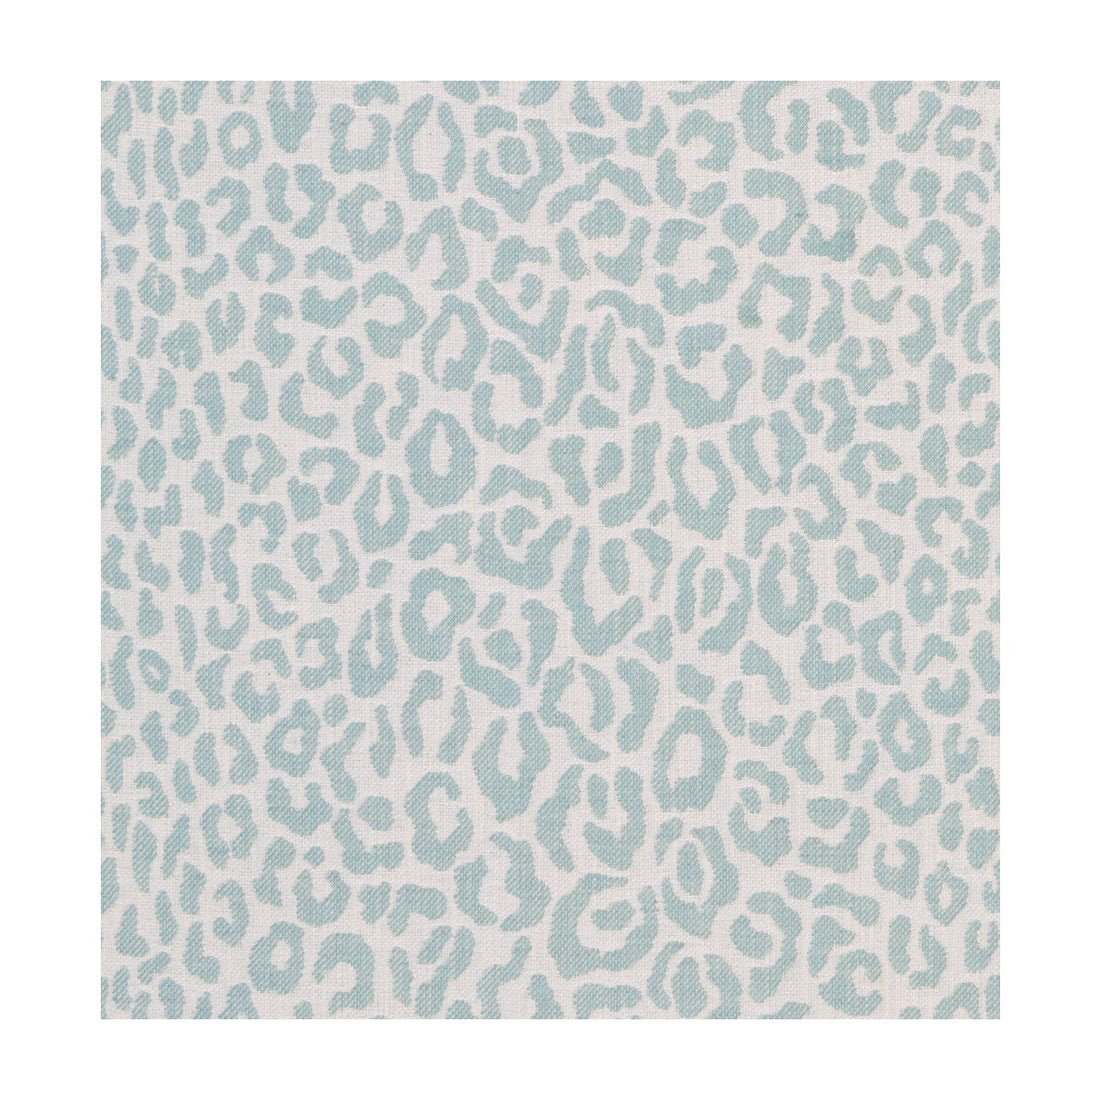 Kittykat fabric in aquamarine color - pattern 34265.1516.0 - by Kravet Basics in the Sarah Richardson Harmony collection